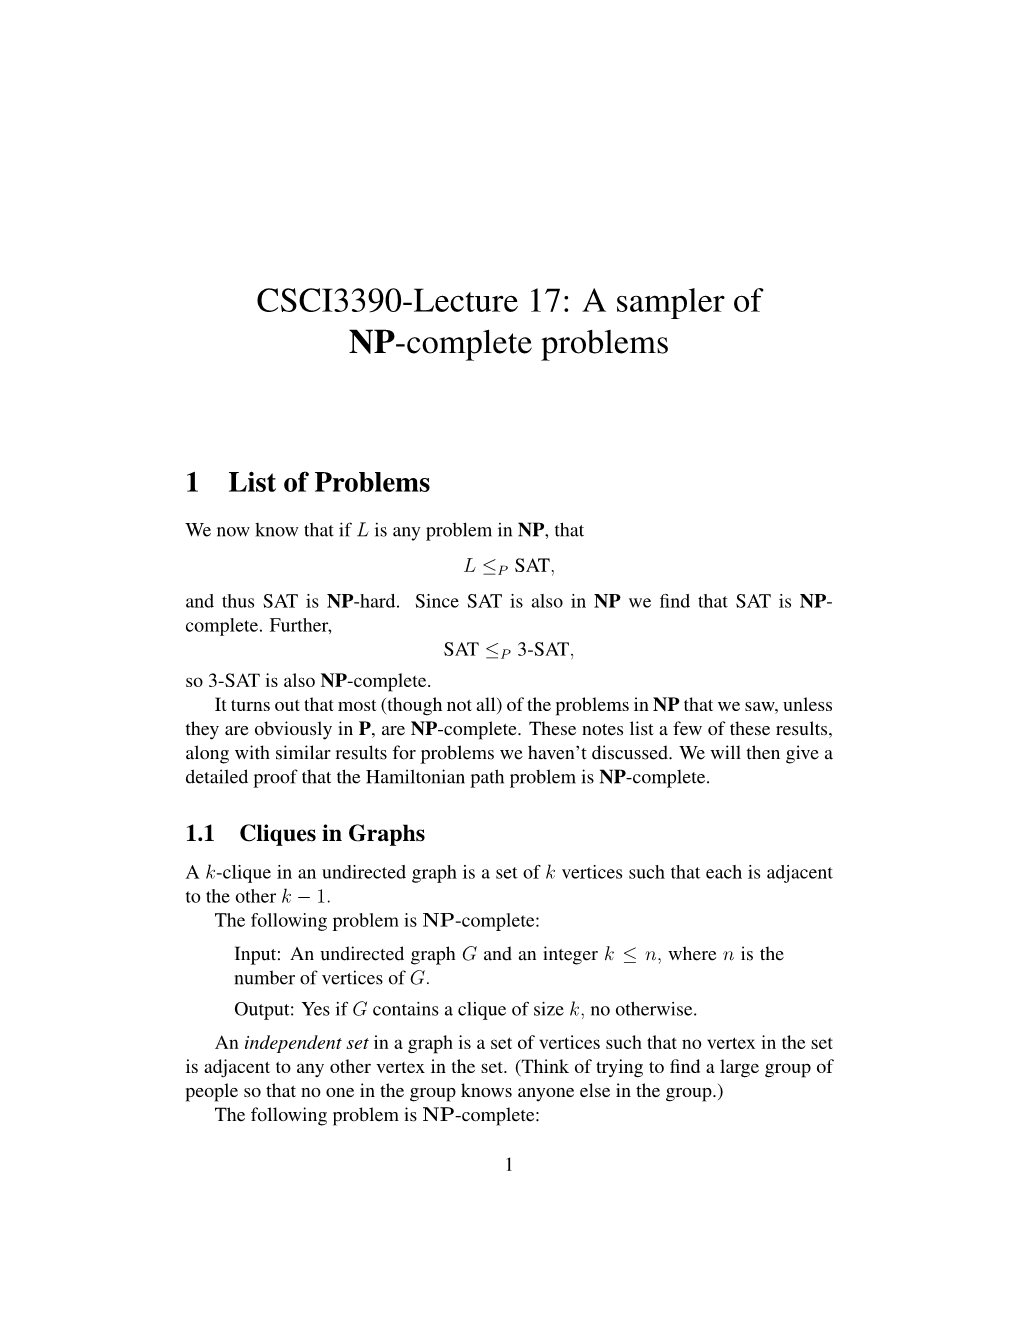 CSCI3390-Lecture 17: a Sampler of NP-Complete Problems